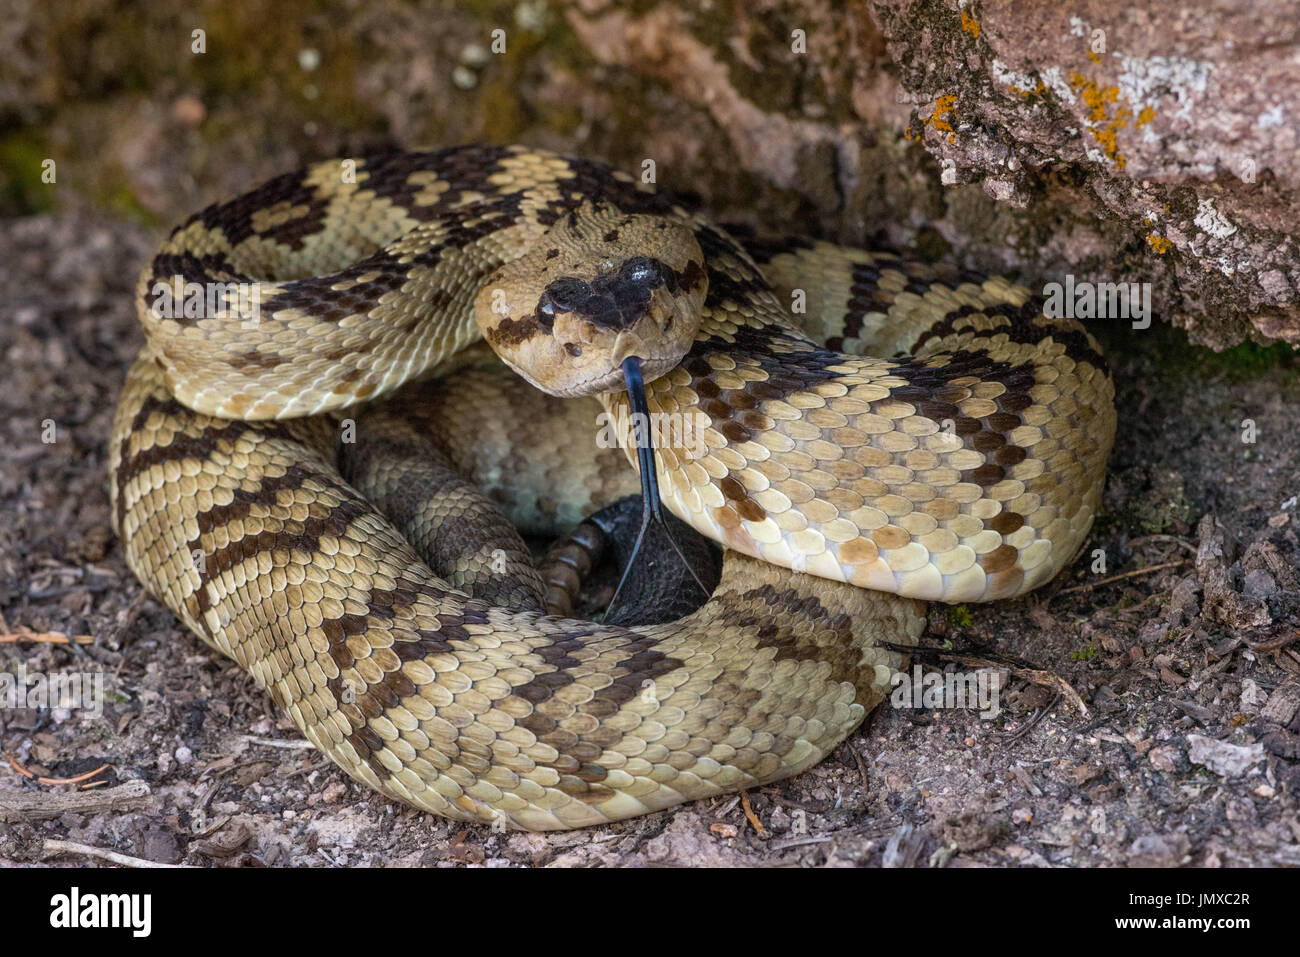 Western Black-tailed Rattlesnake, (Crotalus molasses), Gila Wilderness, Grant co., New Mexico, USA. Stock Photo